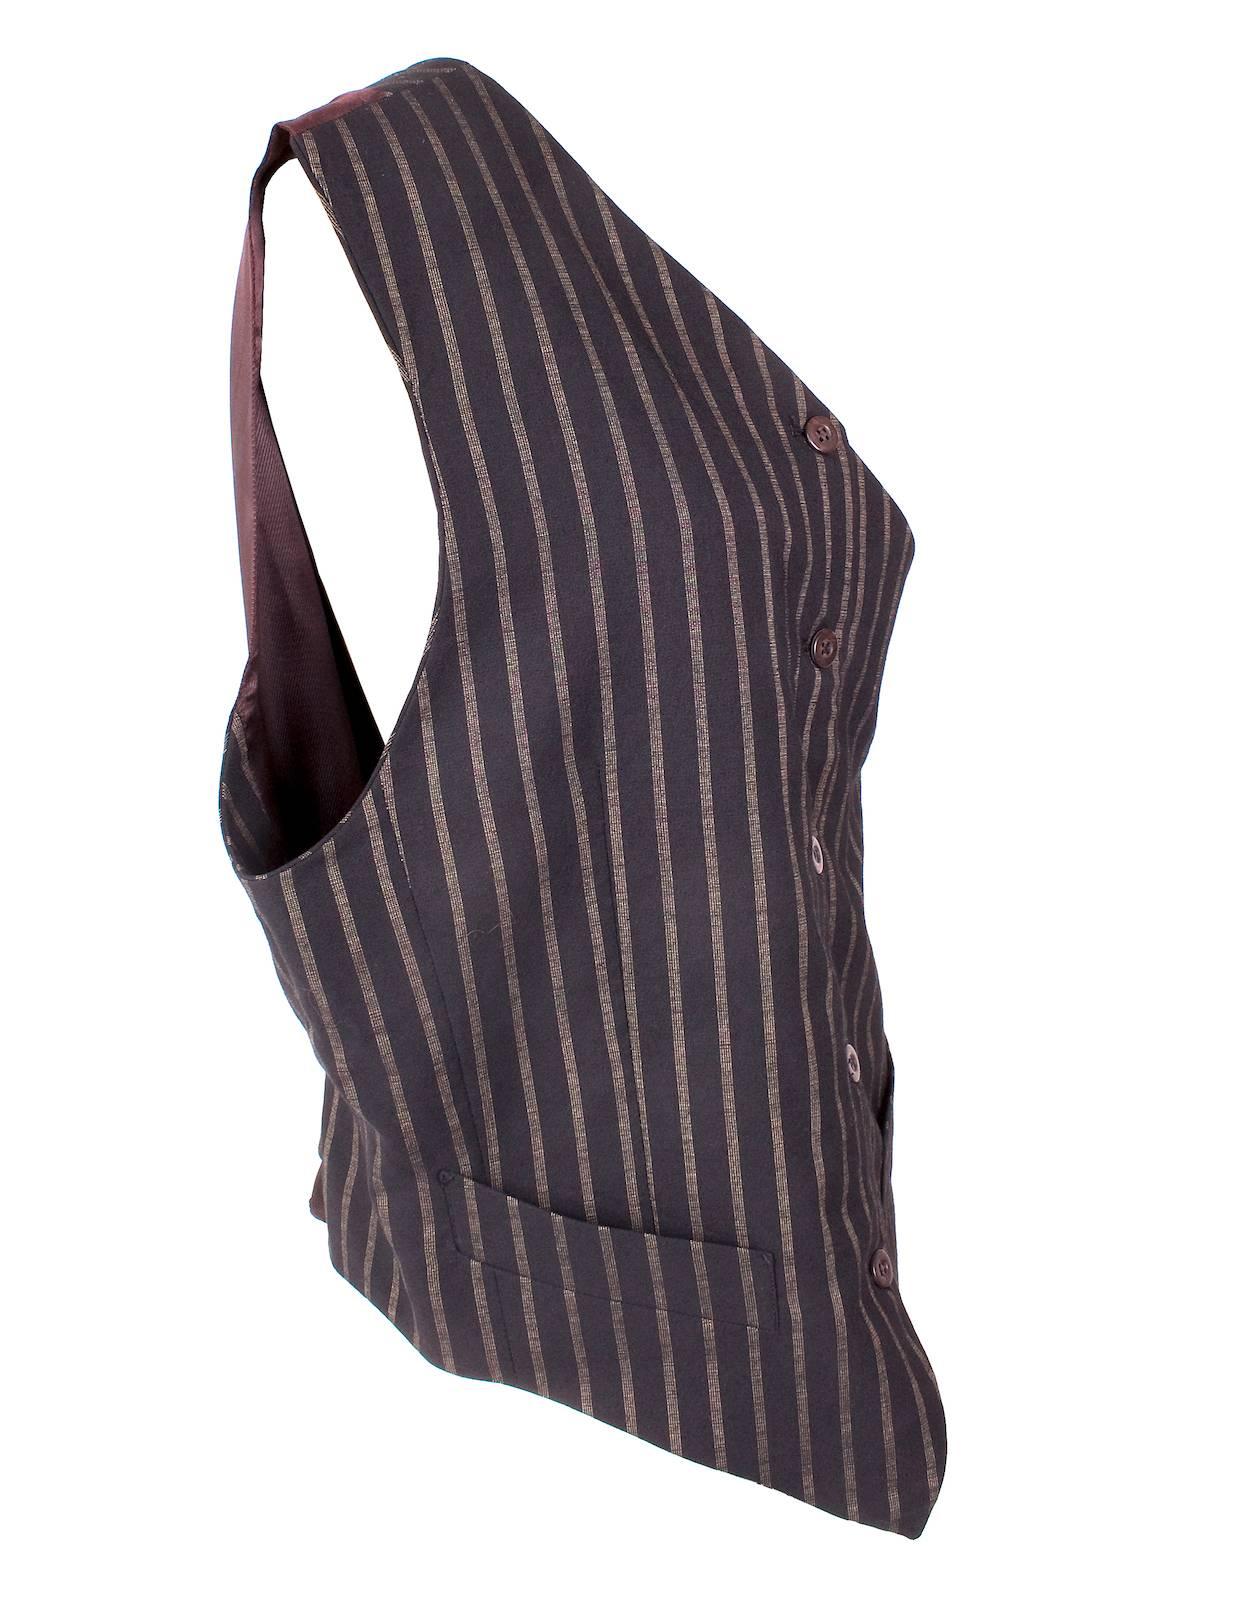 This is a front button vest by Jean Paul Gaultier circa late 1980s/early 1990s.  It features a single breast closure in front and a back cinch buckle.  

Armpit to armpit measurement is 19